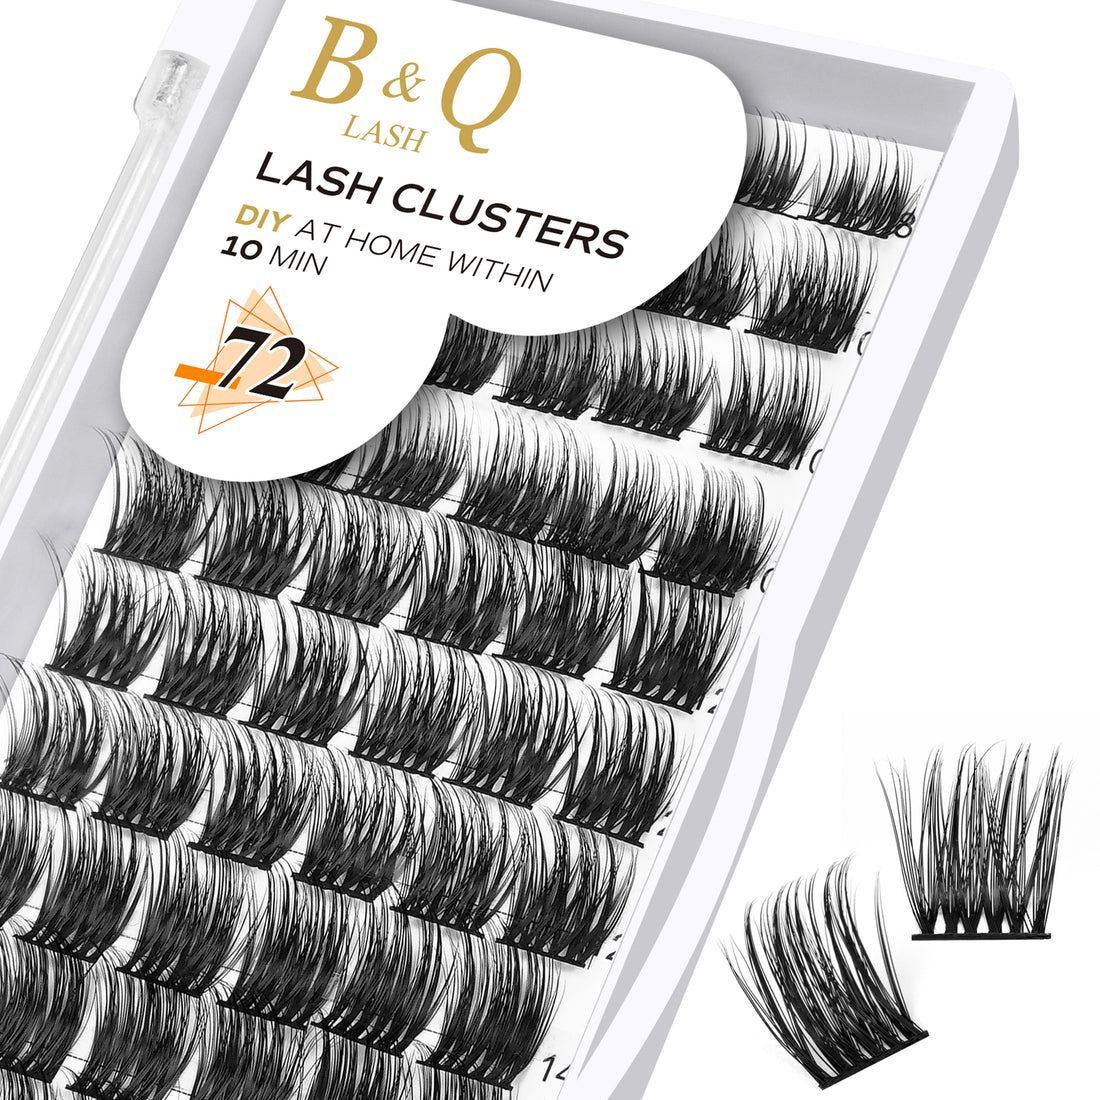 Free, just pay shipping|B42 Lash Clusters DIY Eyelash Extensions 72 Clusters Lashes